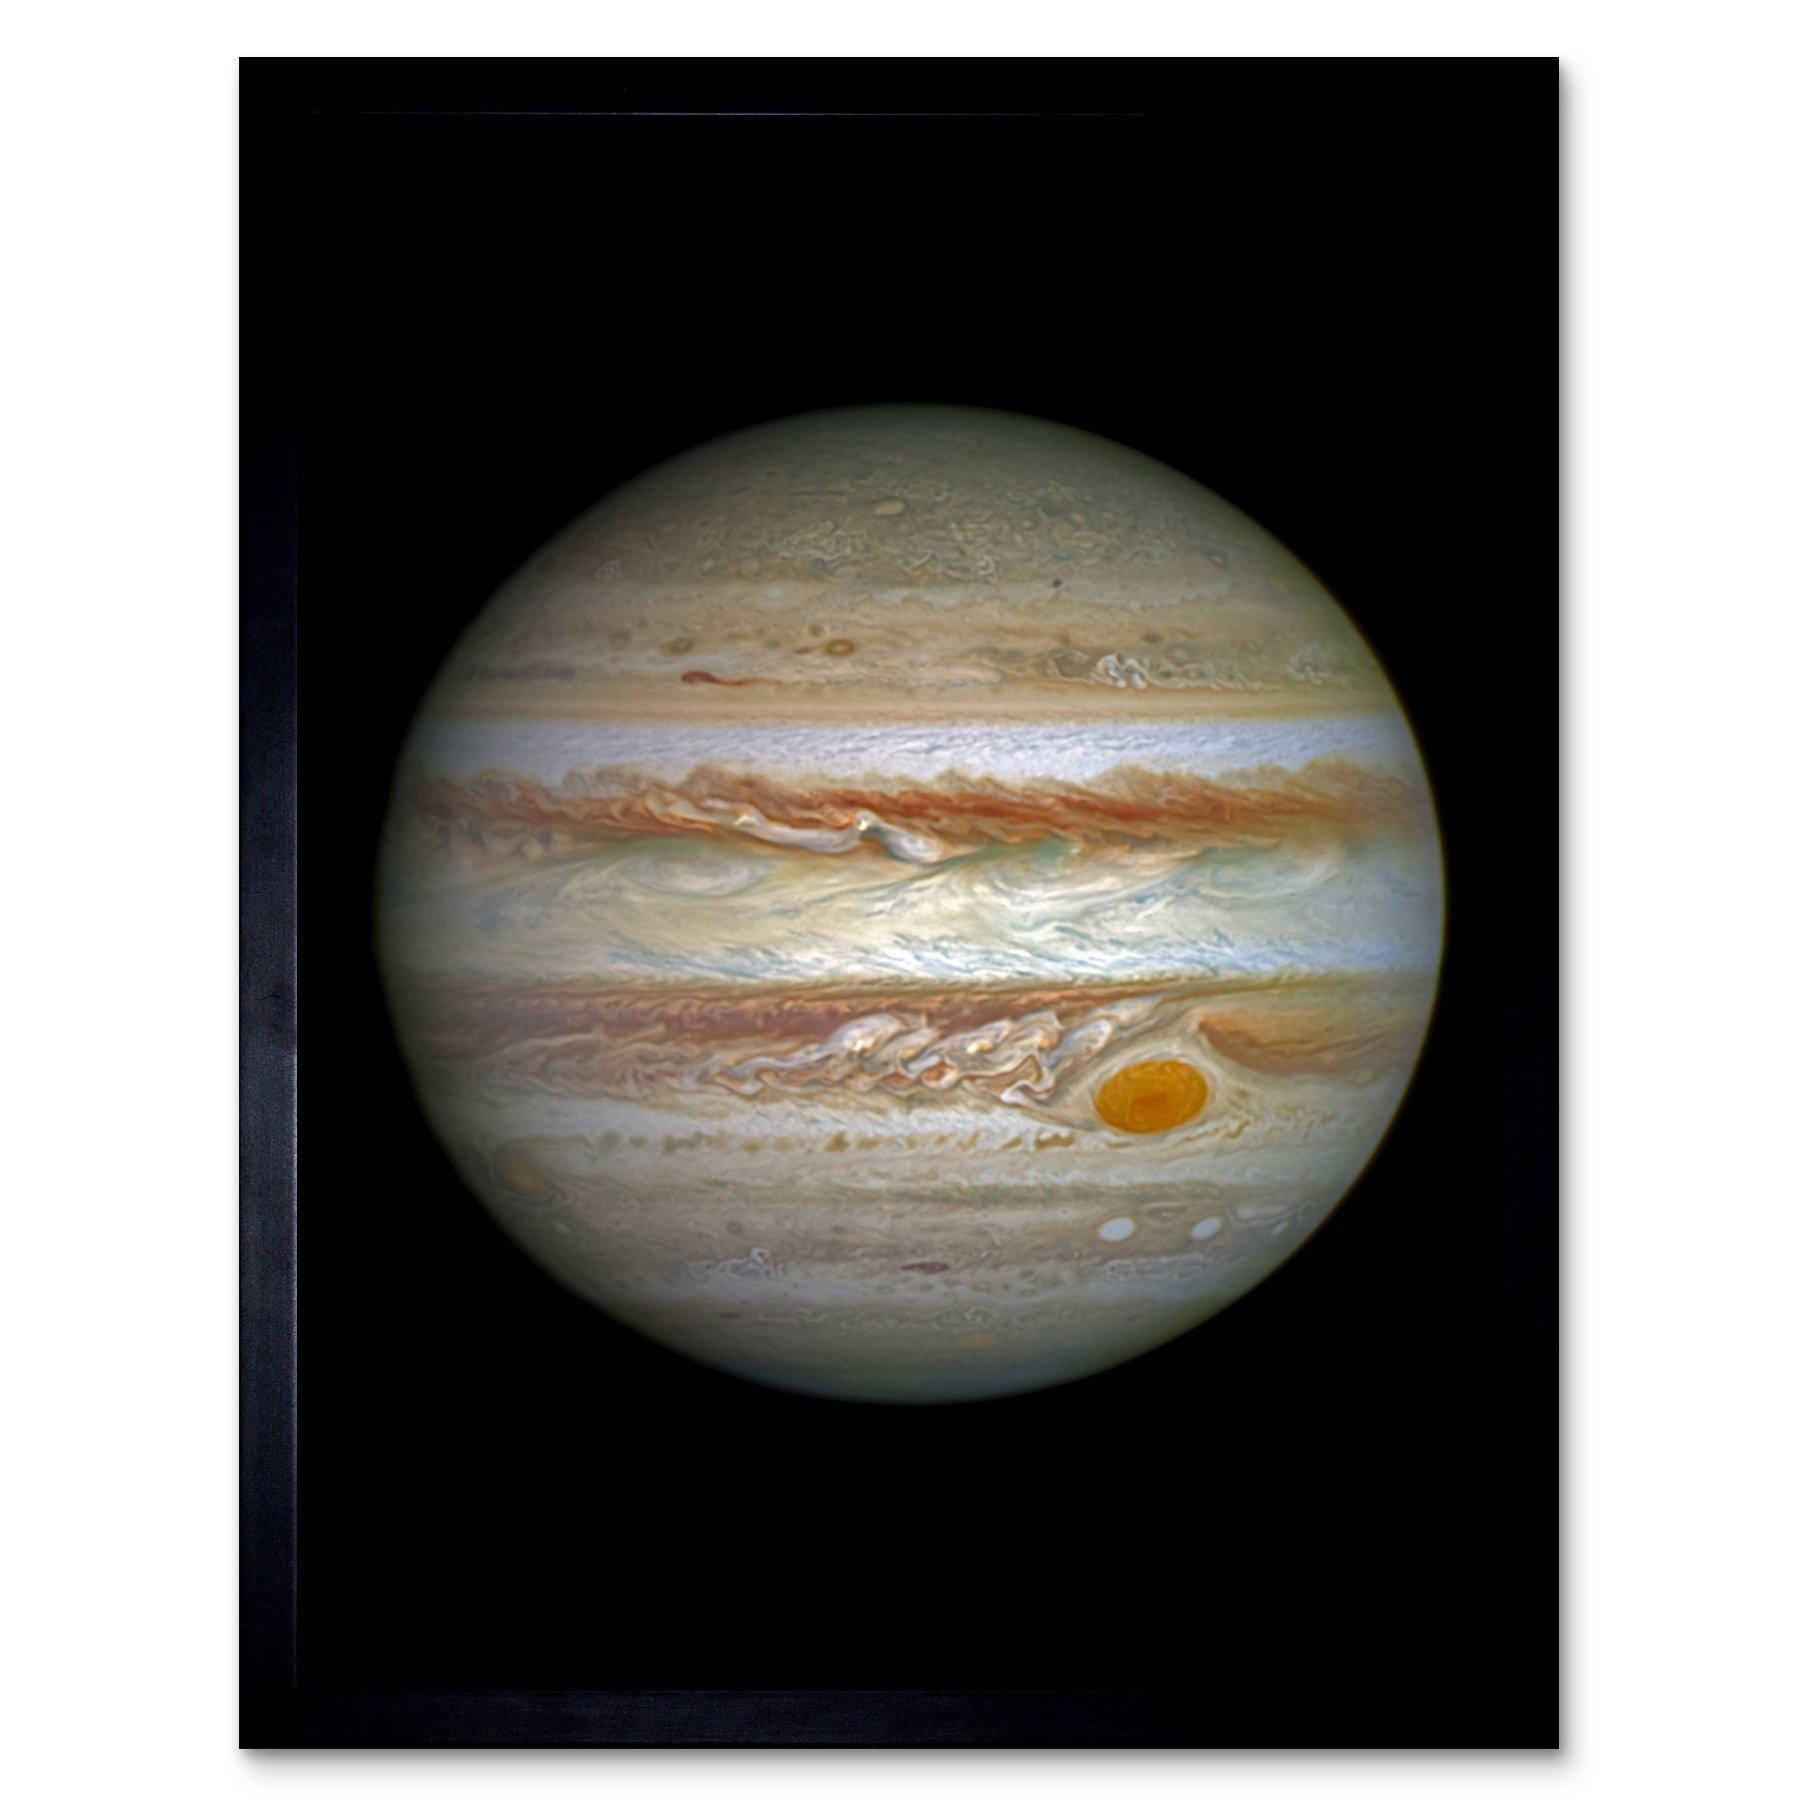 Hubble Space Telescope Image Jupiter WFC3/UVIS Largest Planet In Our Solar System Great Red Spot View Anticyclone And Colourful Atmosphere Bands Art Print Framed Poster Wall Decor - image 1